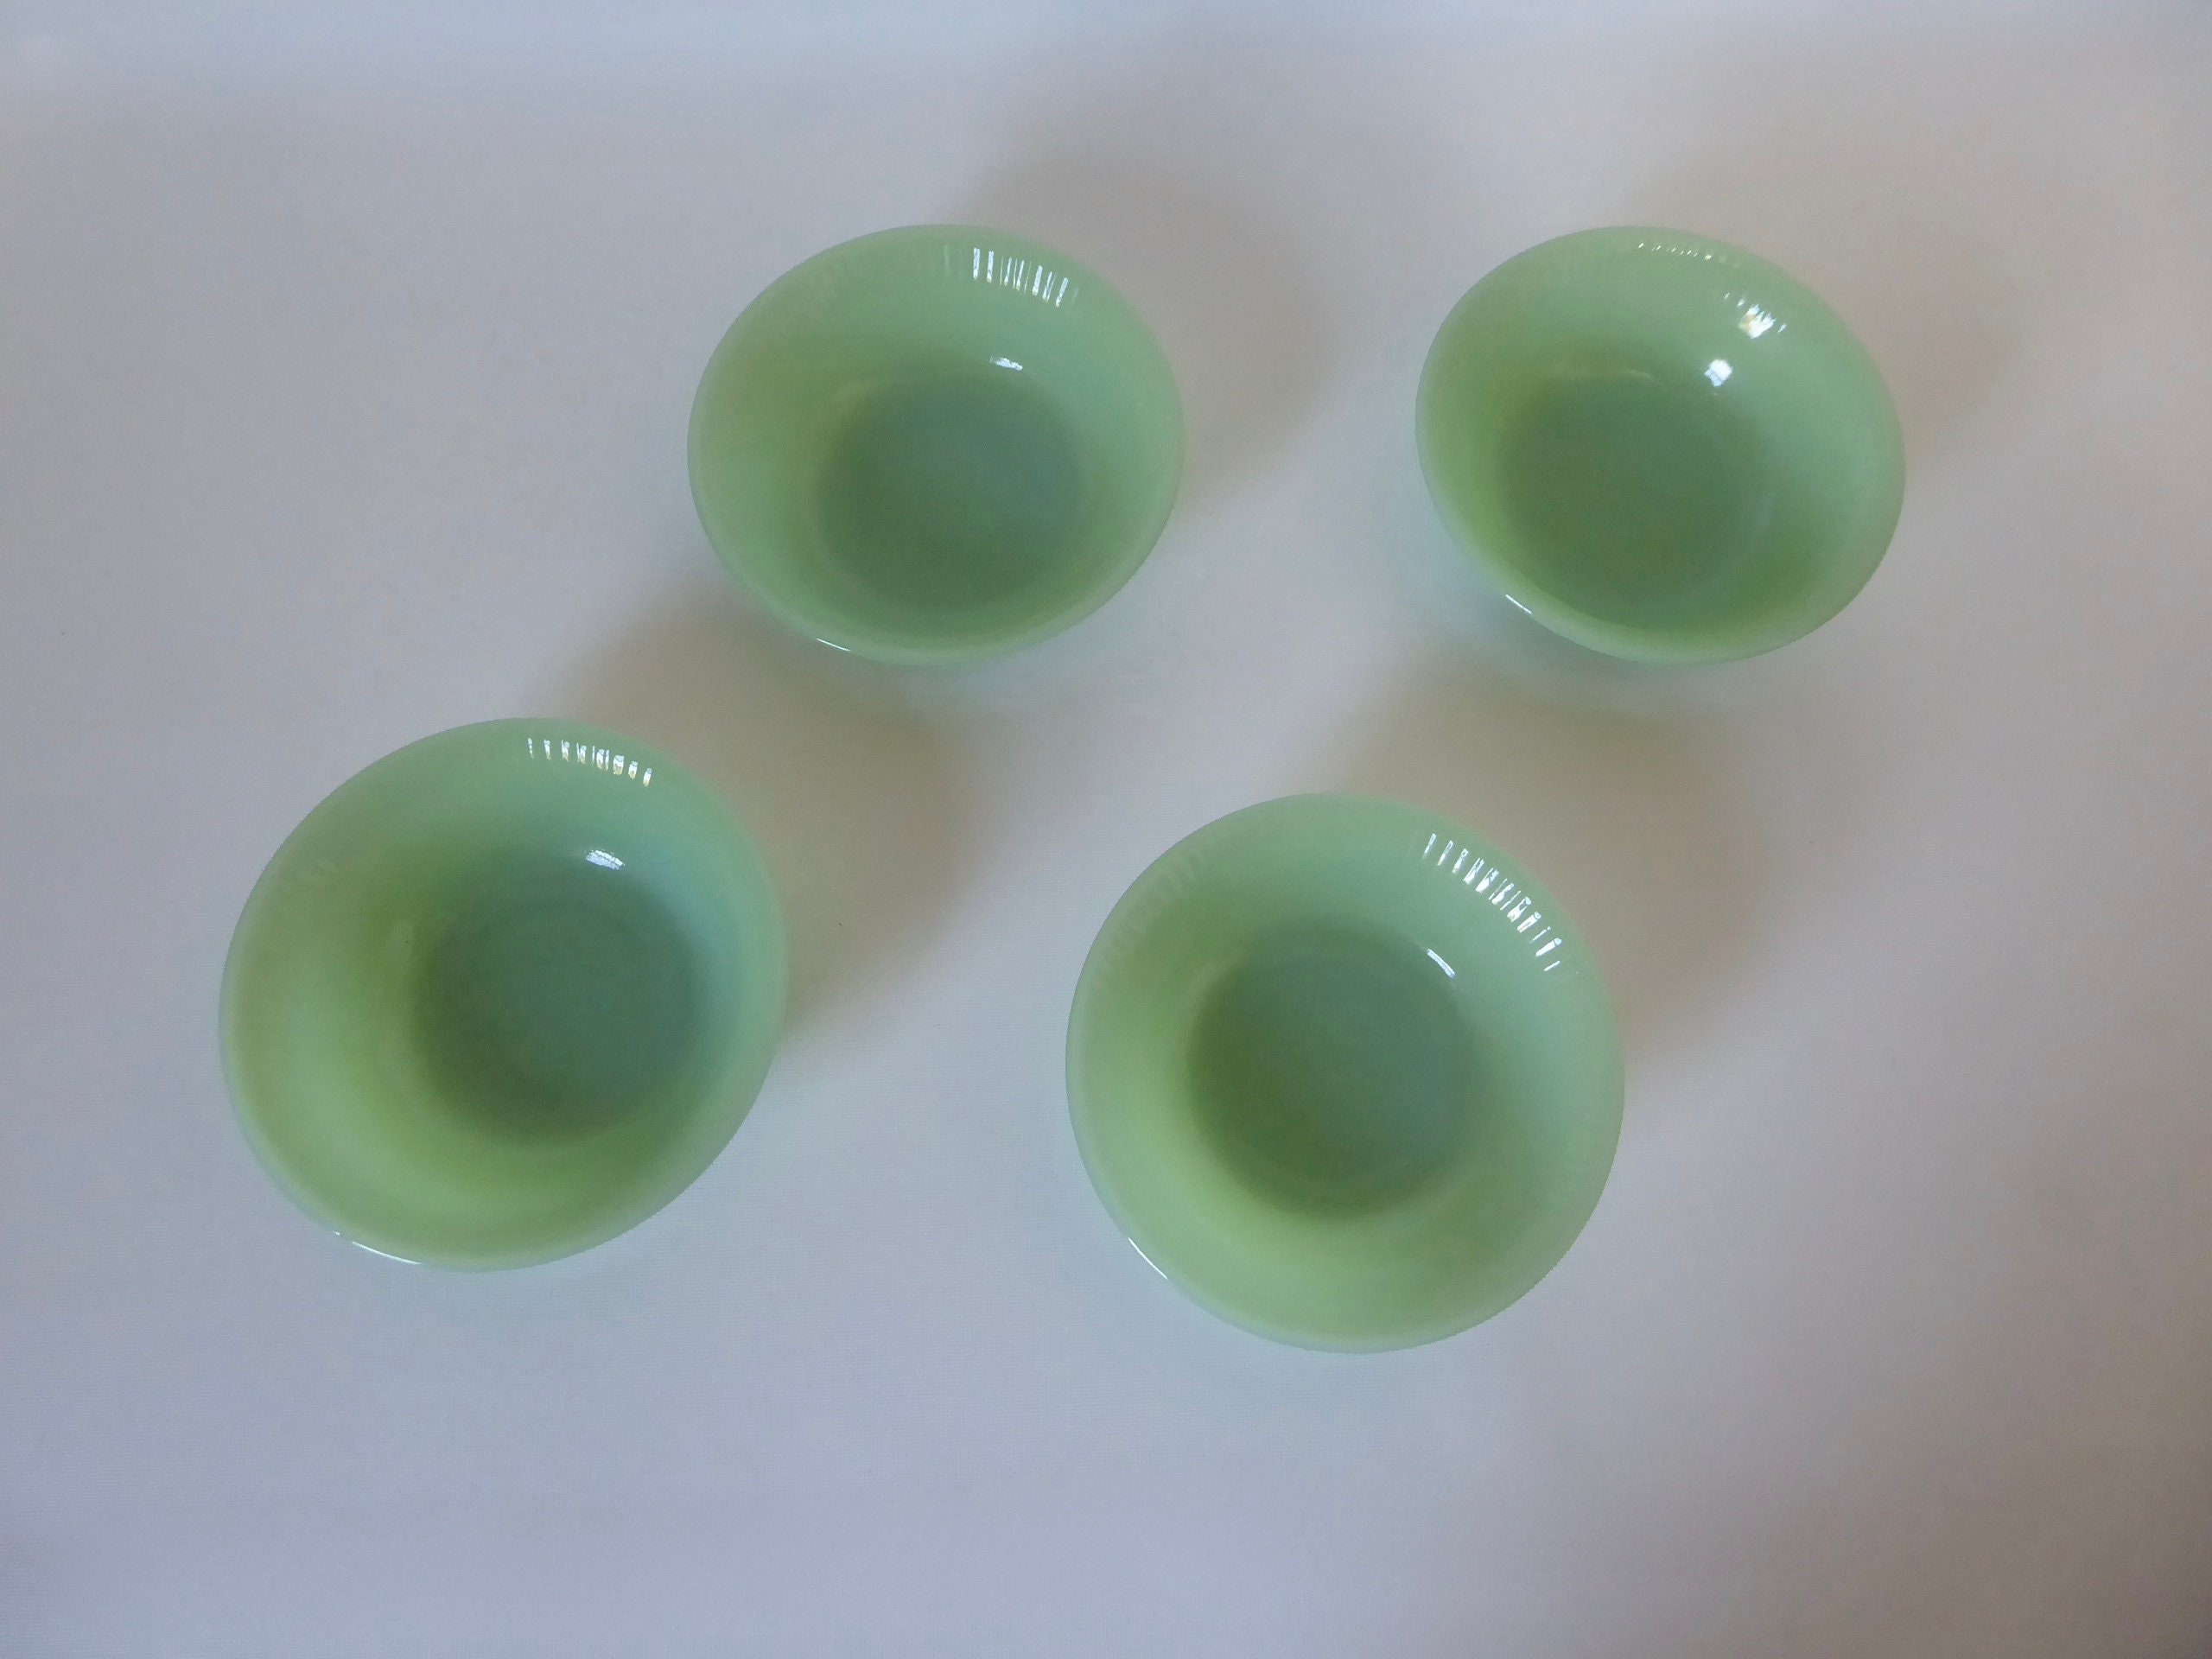 Jadeite Green Depression Style Glass Beehive Drippings Bowl With